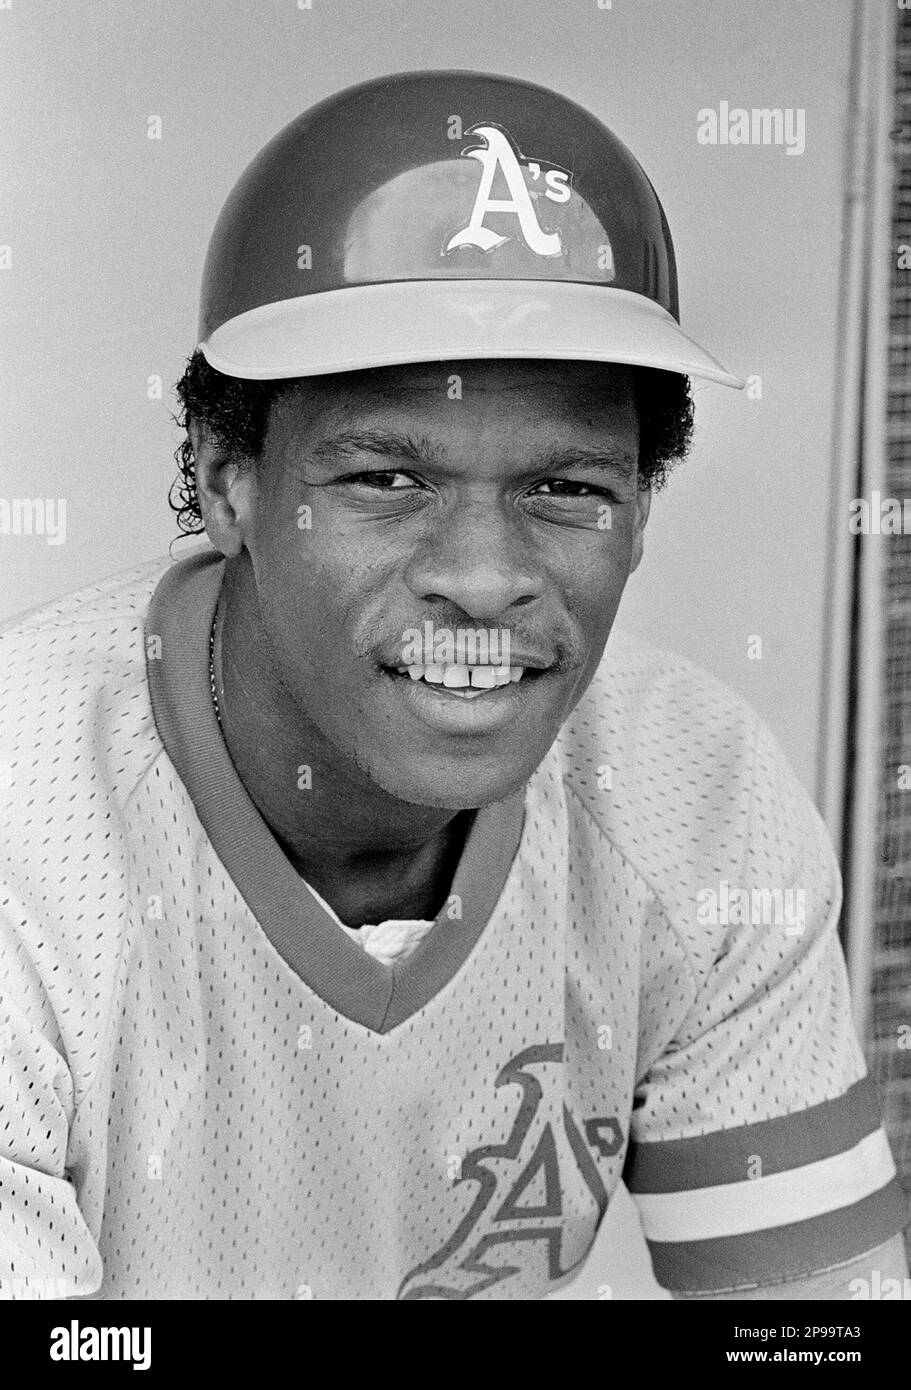 On this day in 1989: Athletics reacquire Rickey Henderson